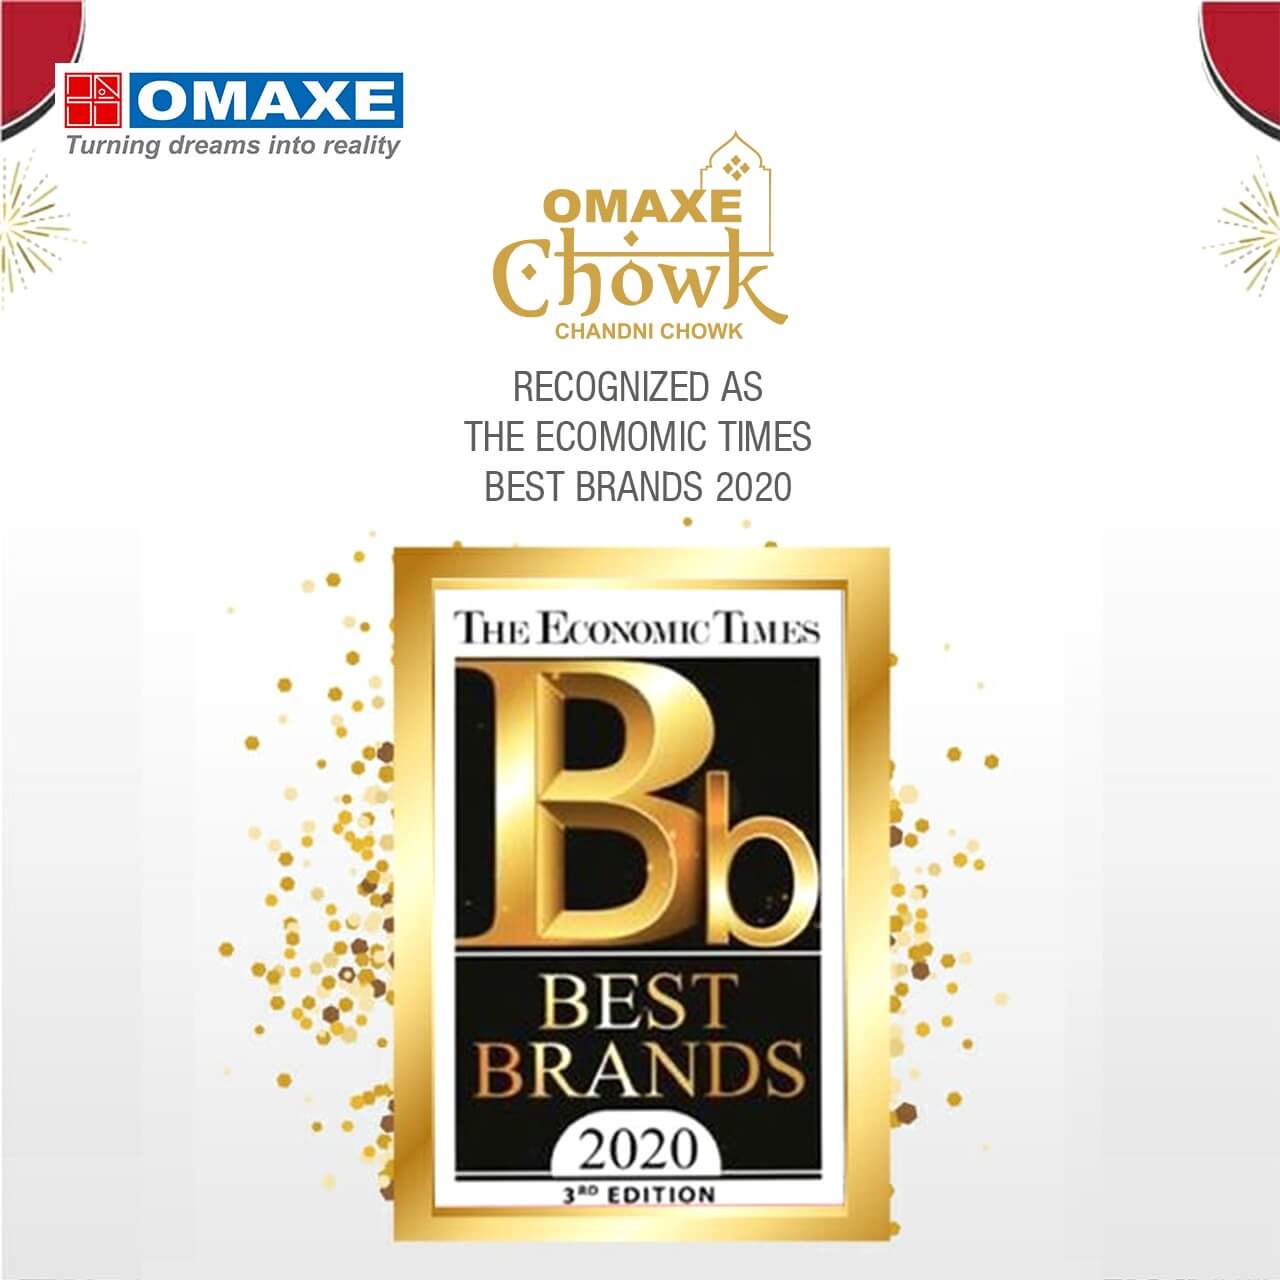 Omaxe Chowk has been recognised as The Economic Times Best Brands 2020